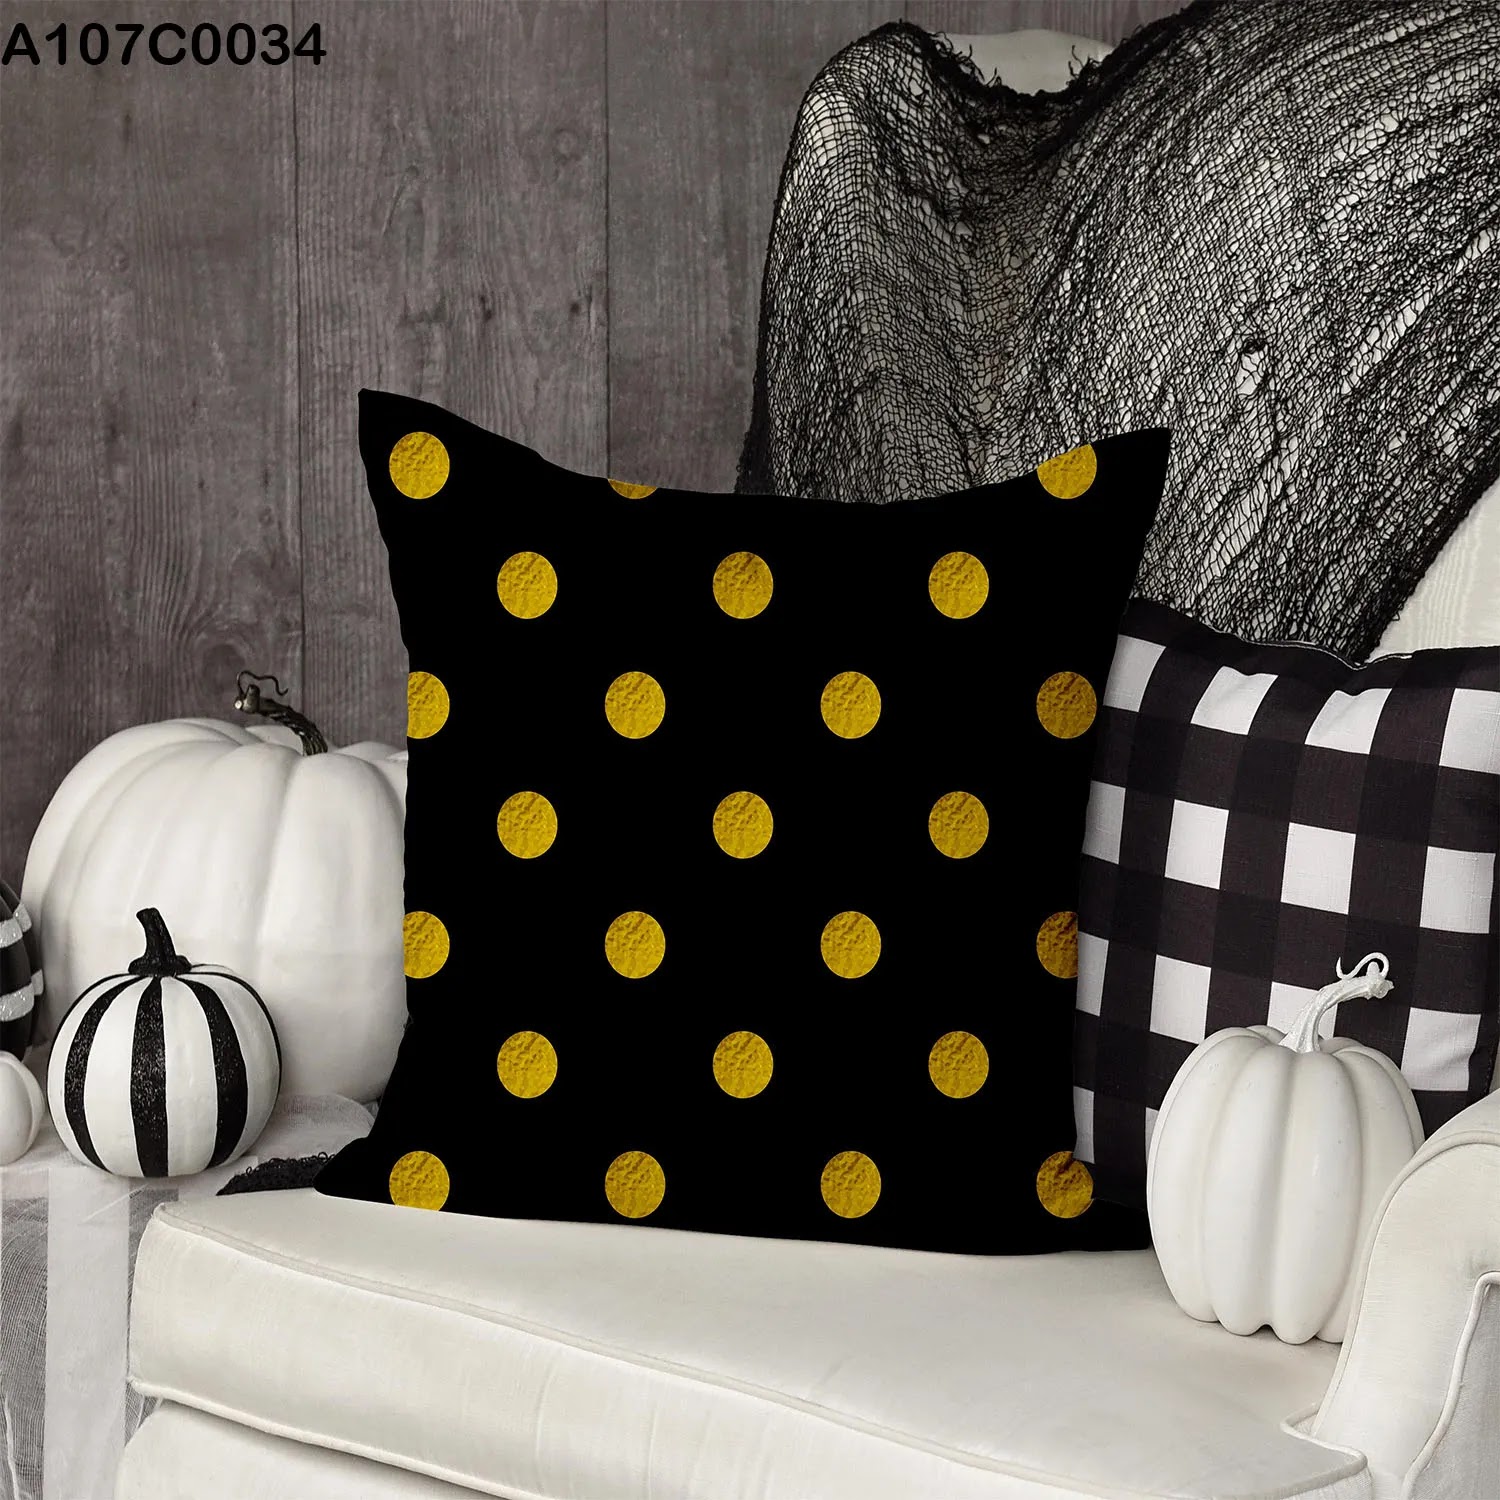 Black pillow case with gold patches